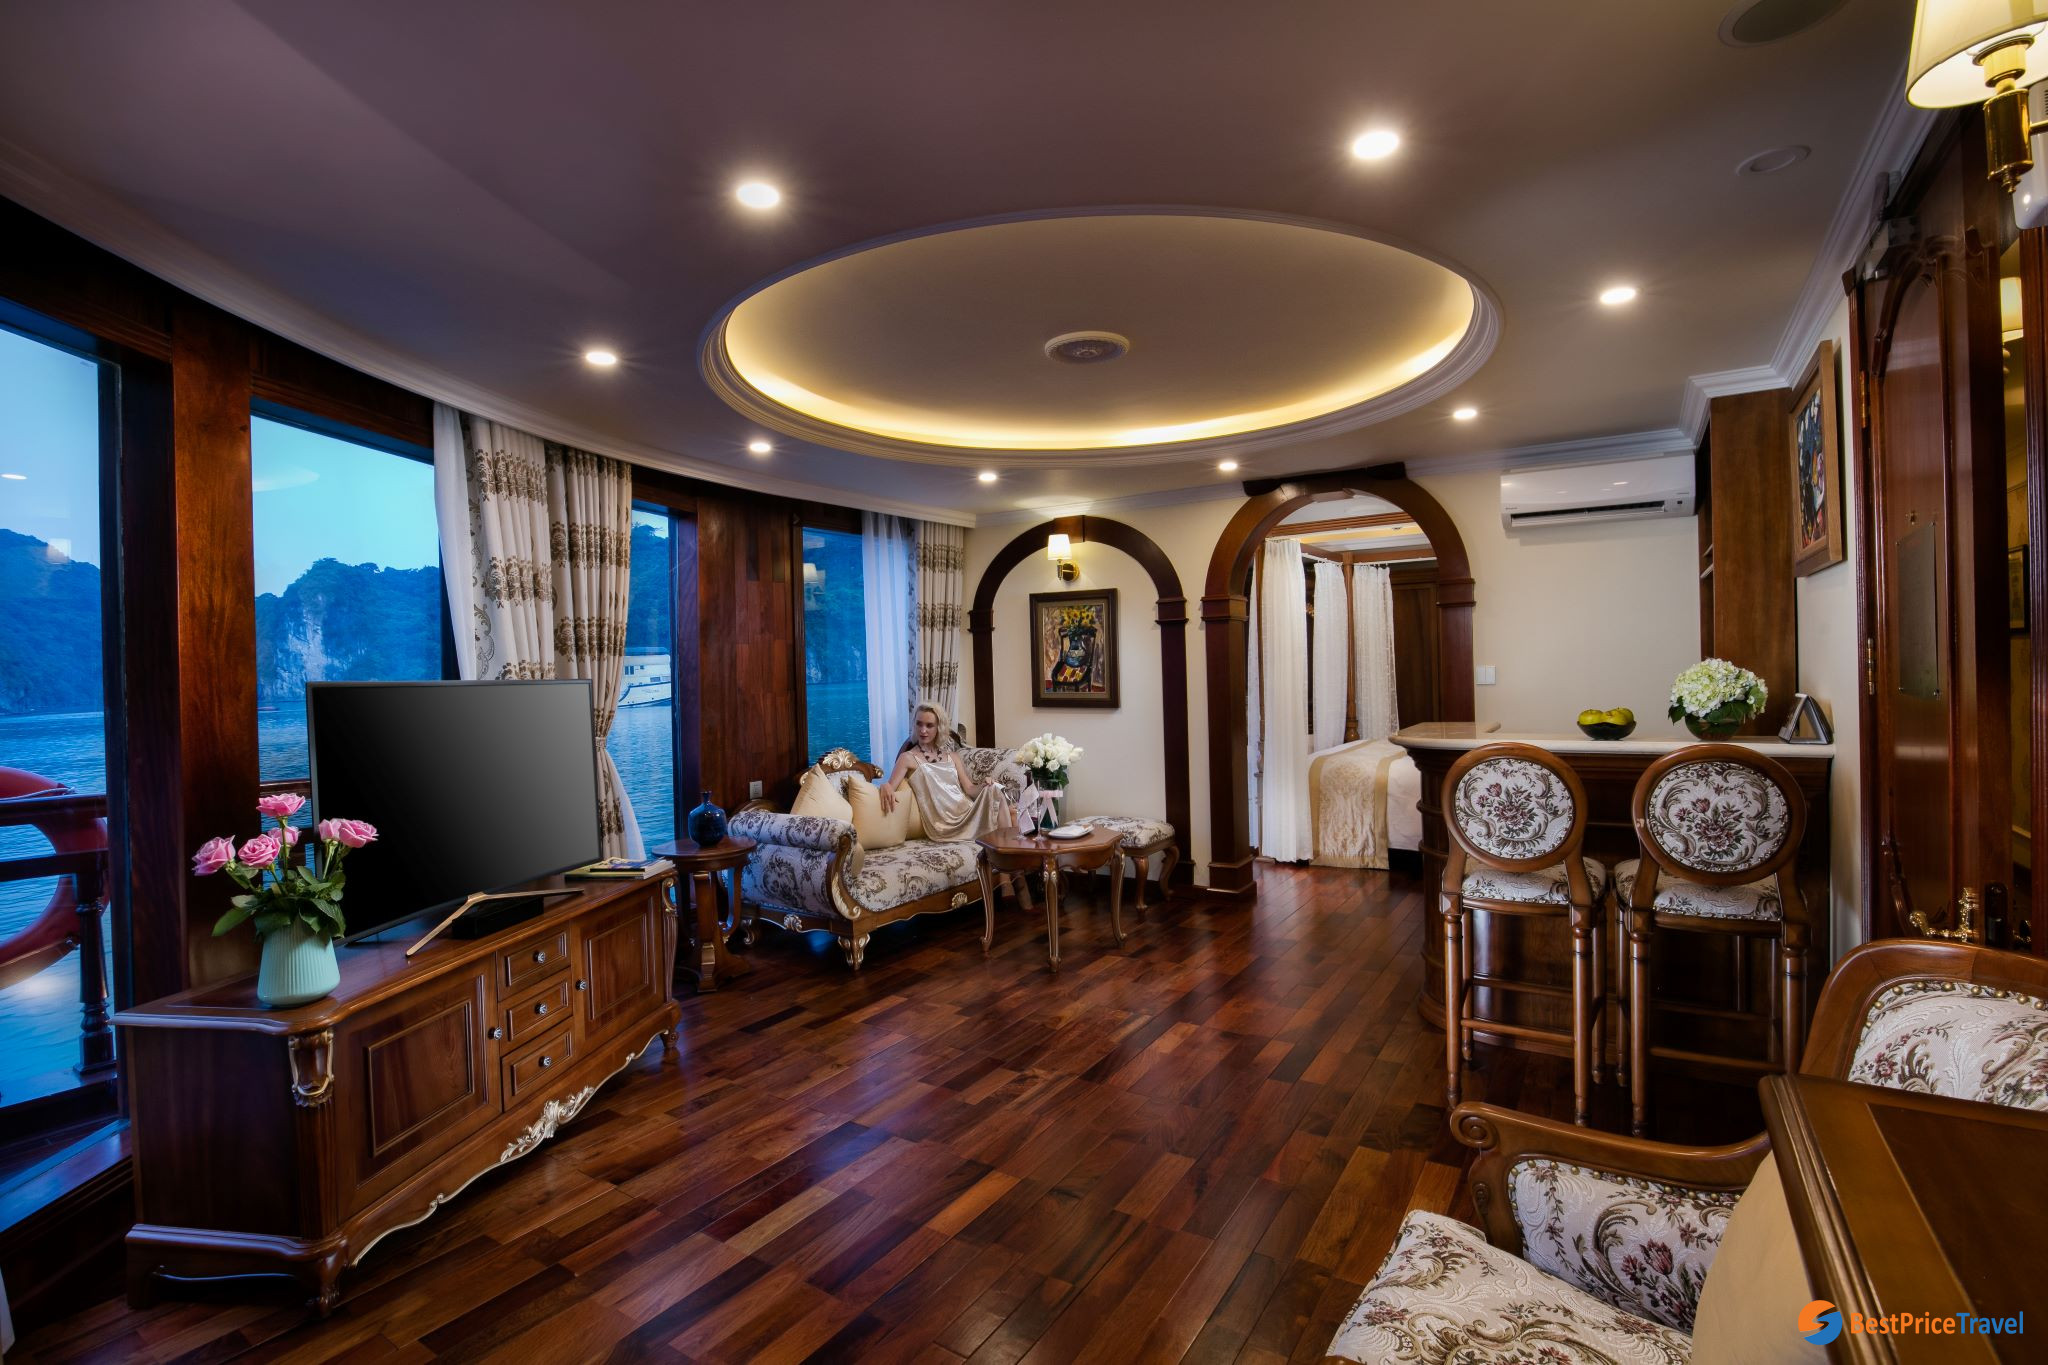 Royal Suite Overview